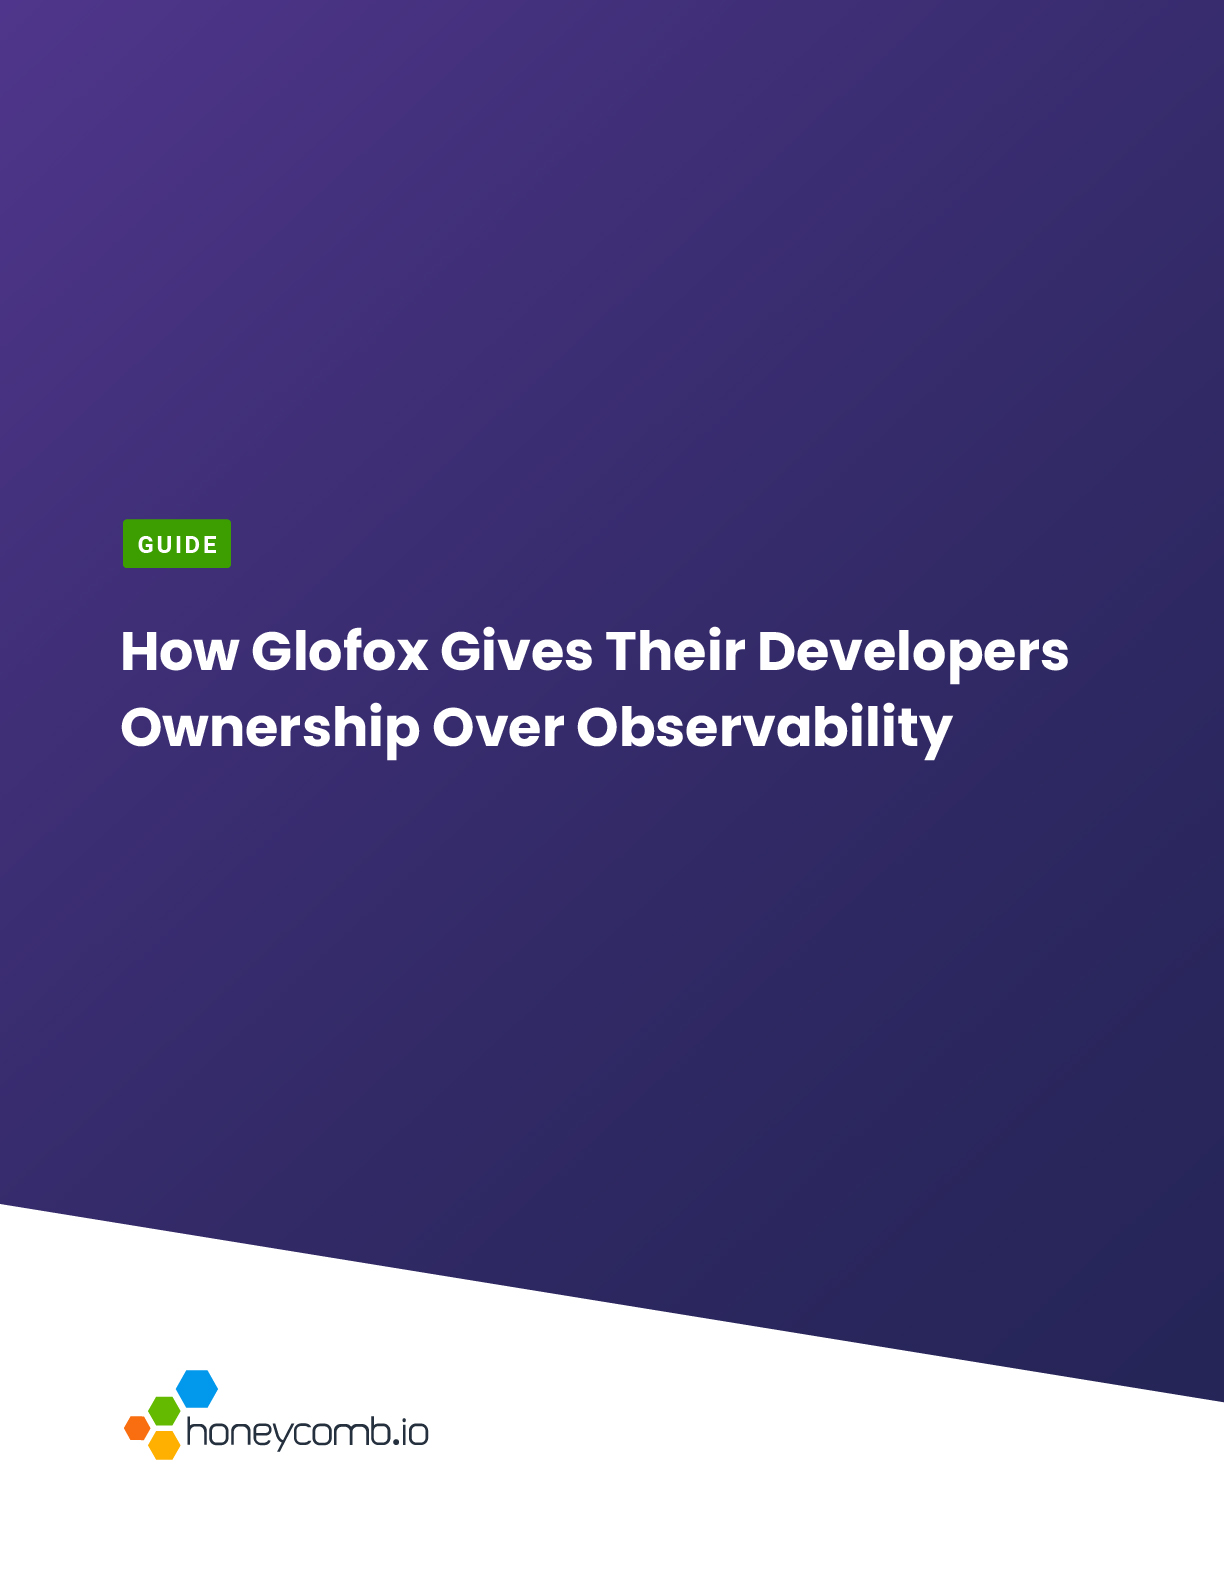 How Glofox gives their developers ownership over observabiilty